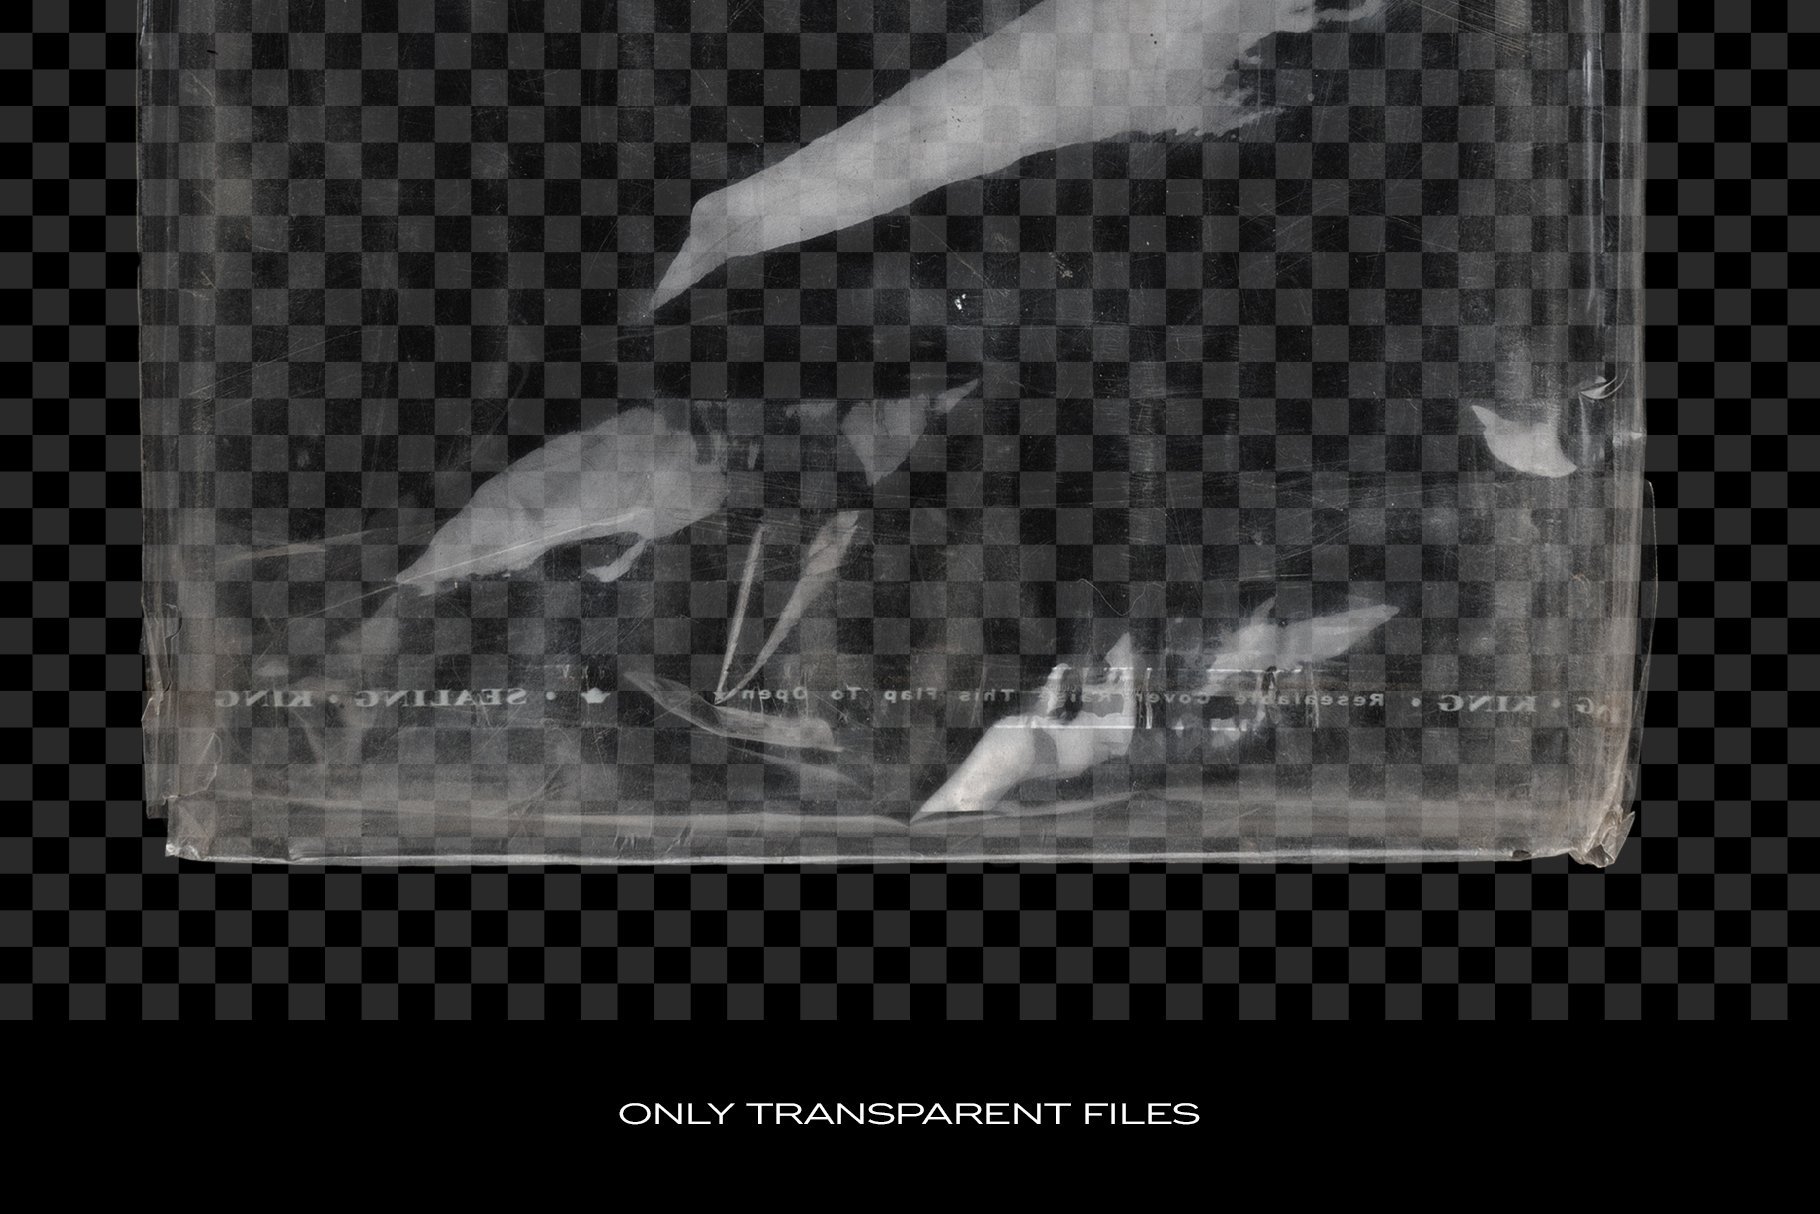 Only transparent files.